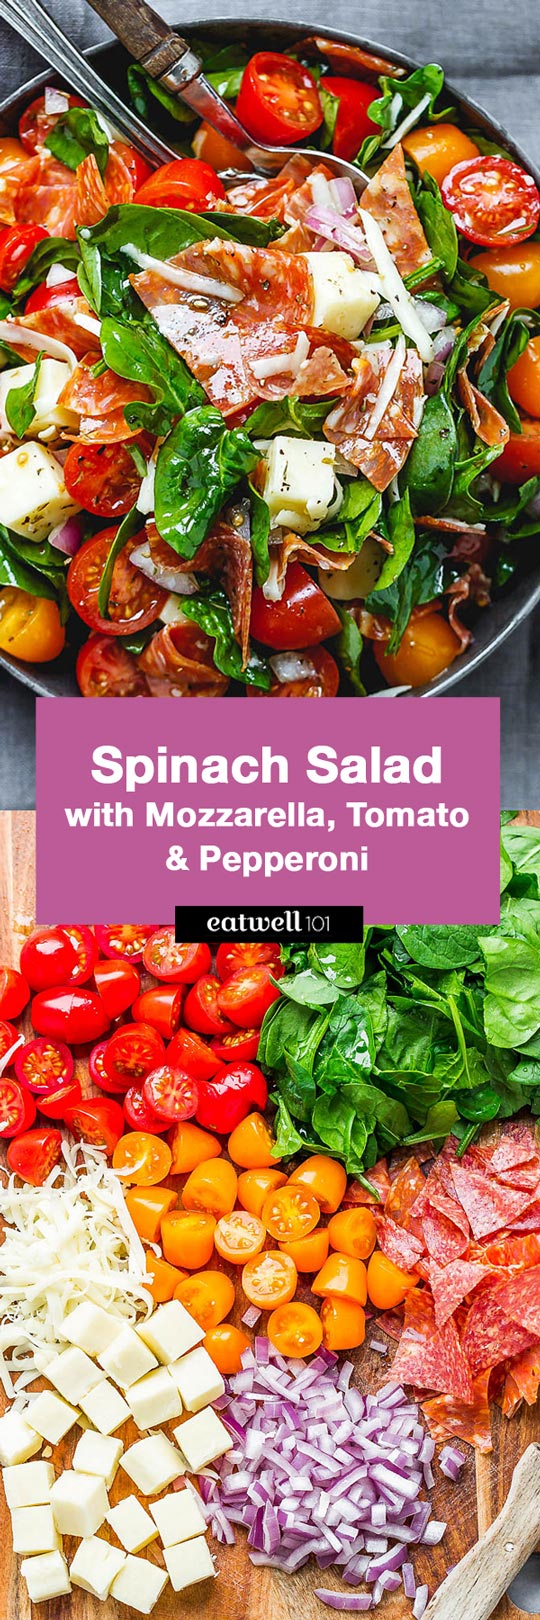 Spinach Salad with Mozzarella, Tomato & Pepperoni - #spinach #salad #recipe #eatwell101 - Healthy and delicious, this spinach salad is so simple and perfect for a quick lunch.